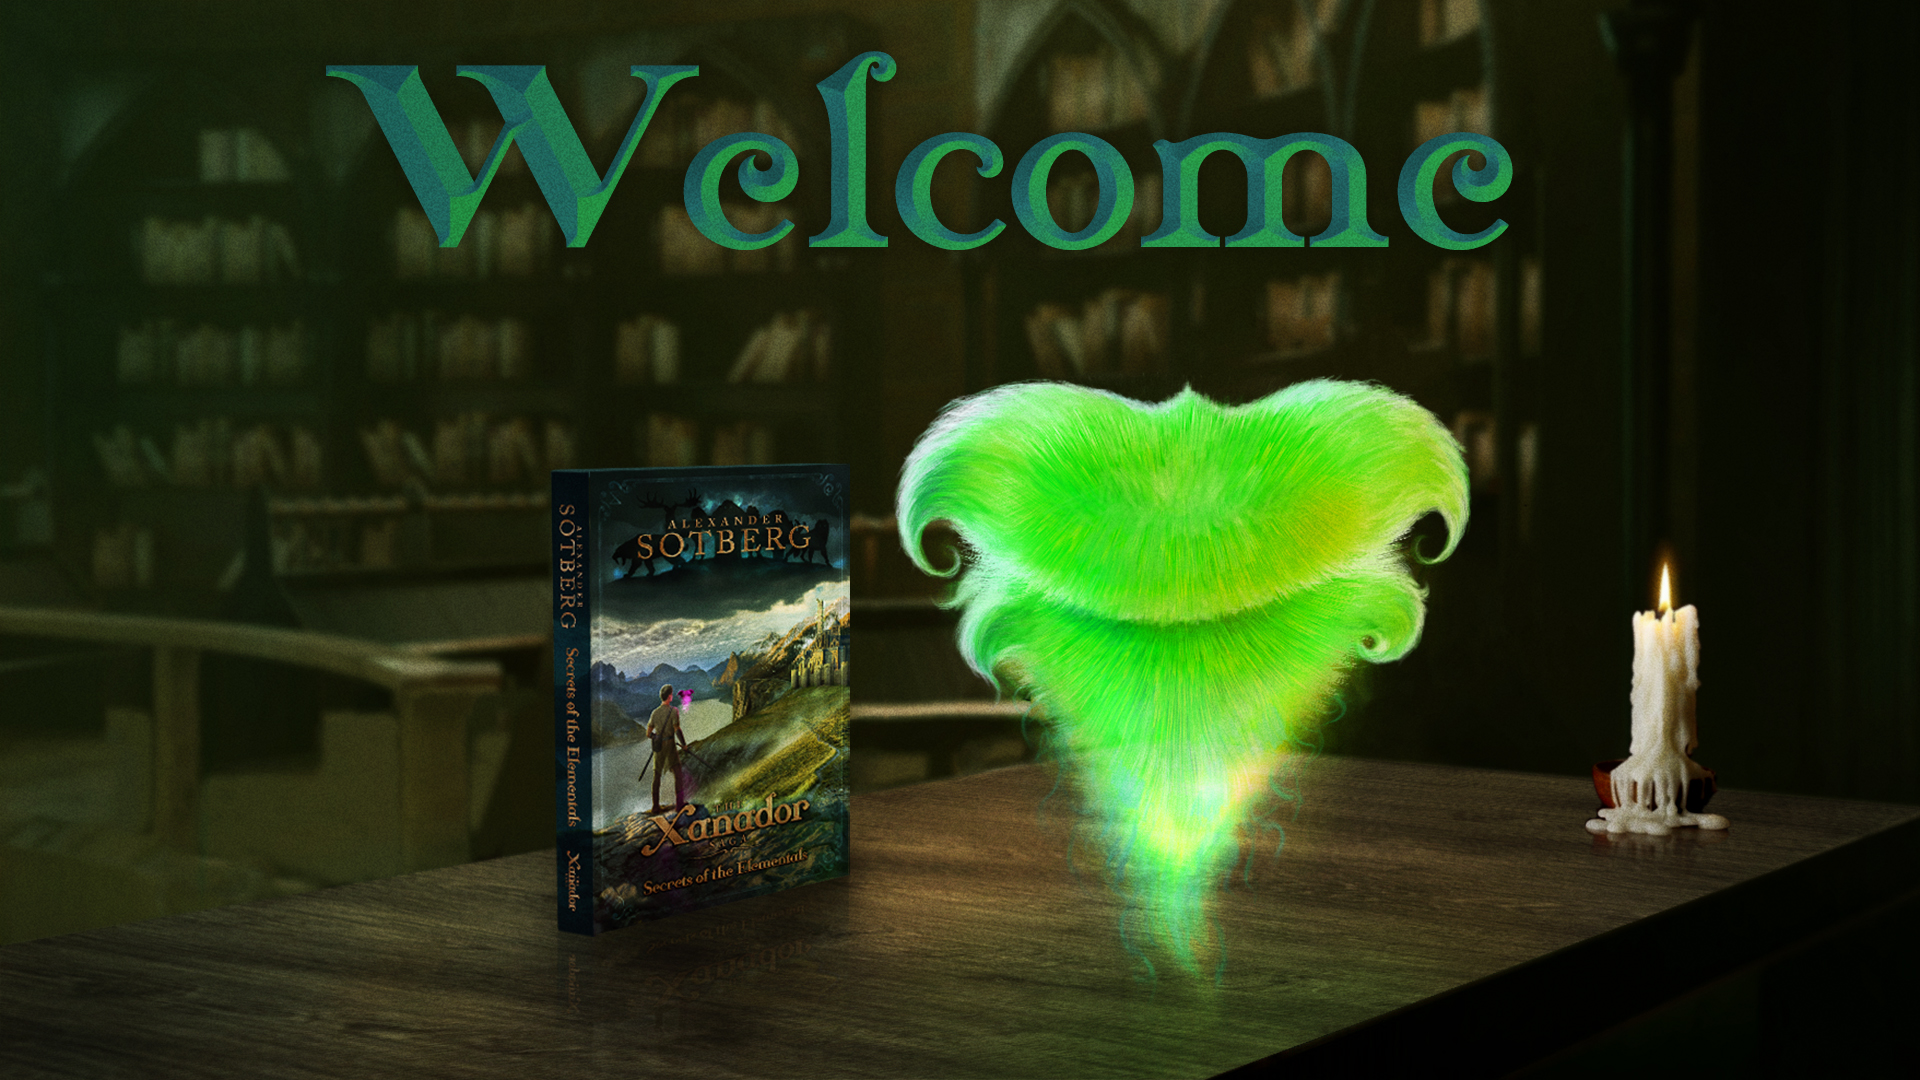 A welcome banner to Alexander Sotberg's website with a picture of a Sparq and the book Secrets of the Elementals